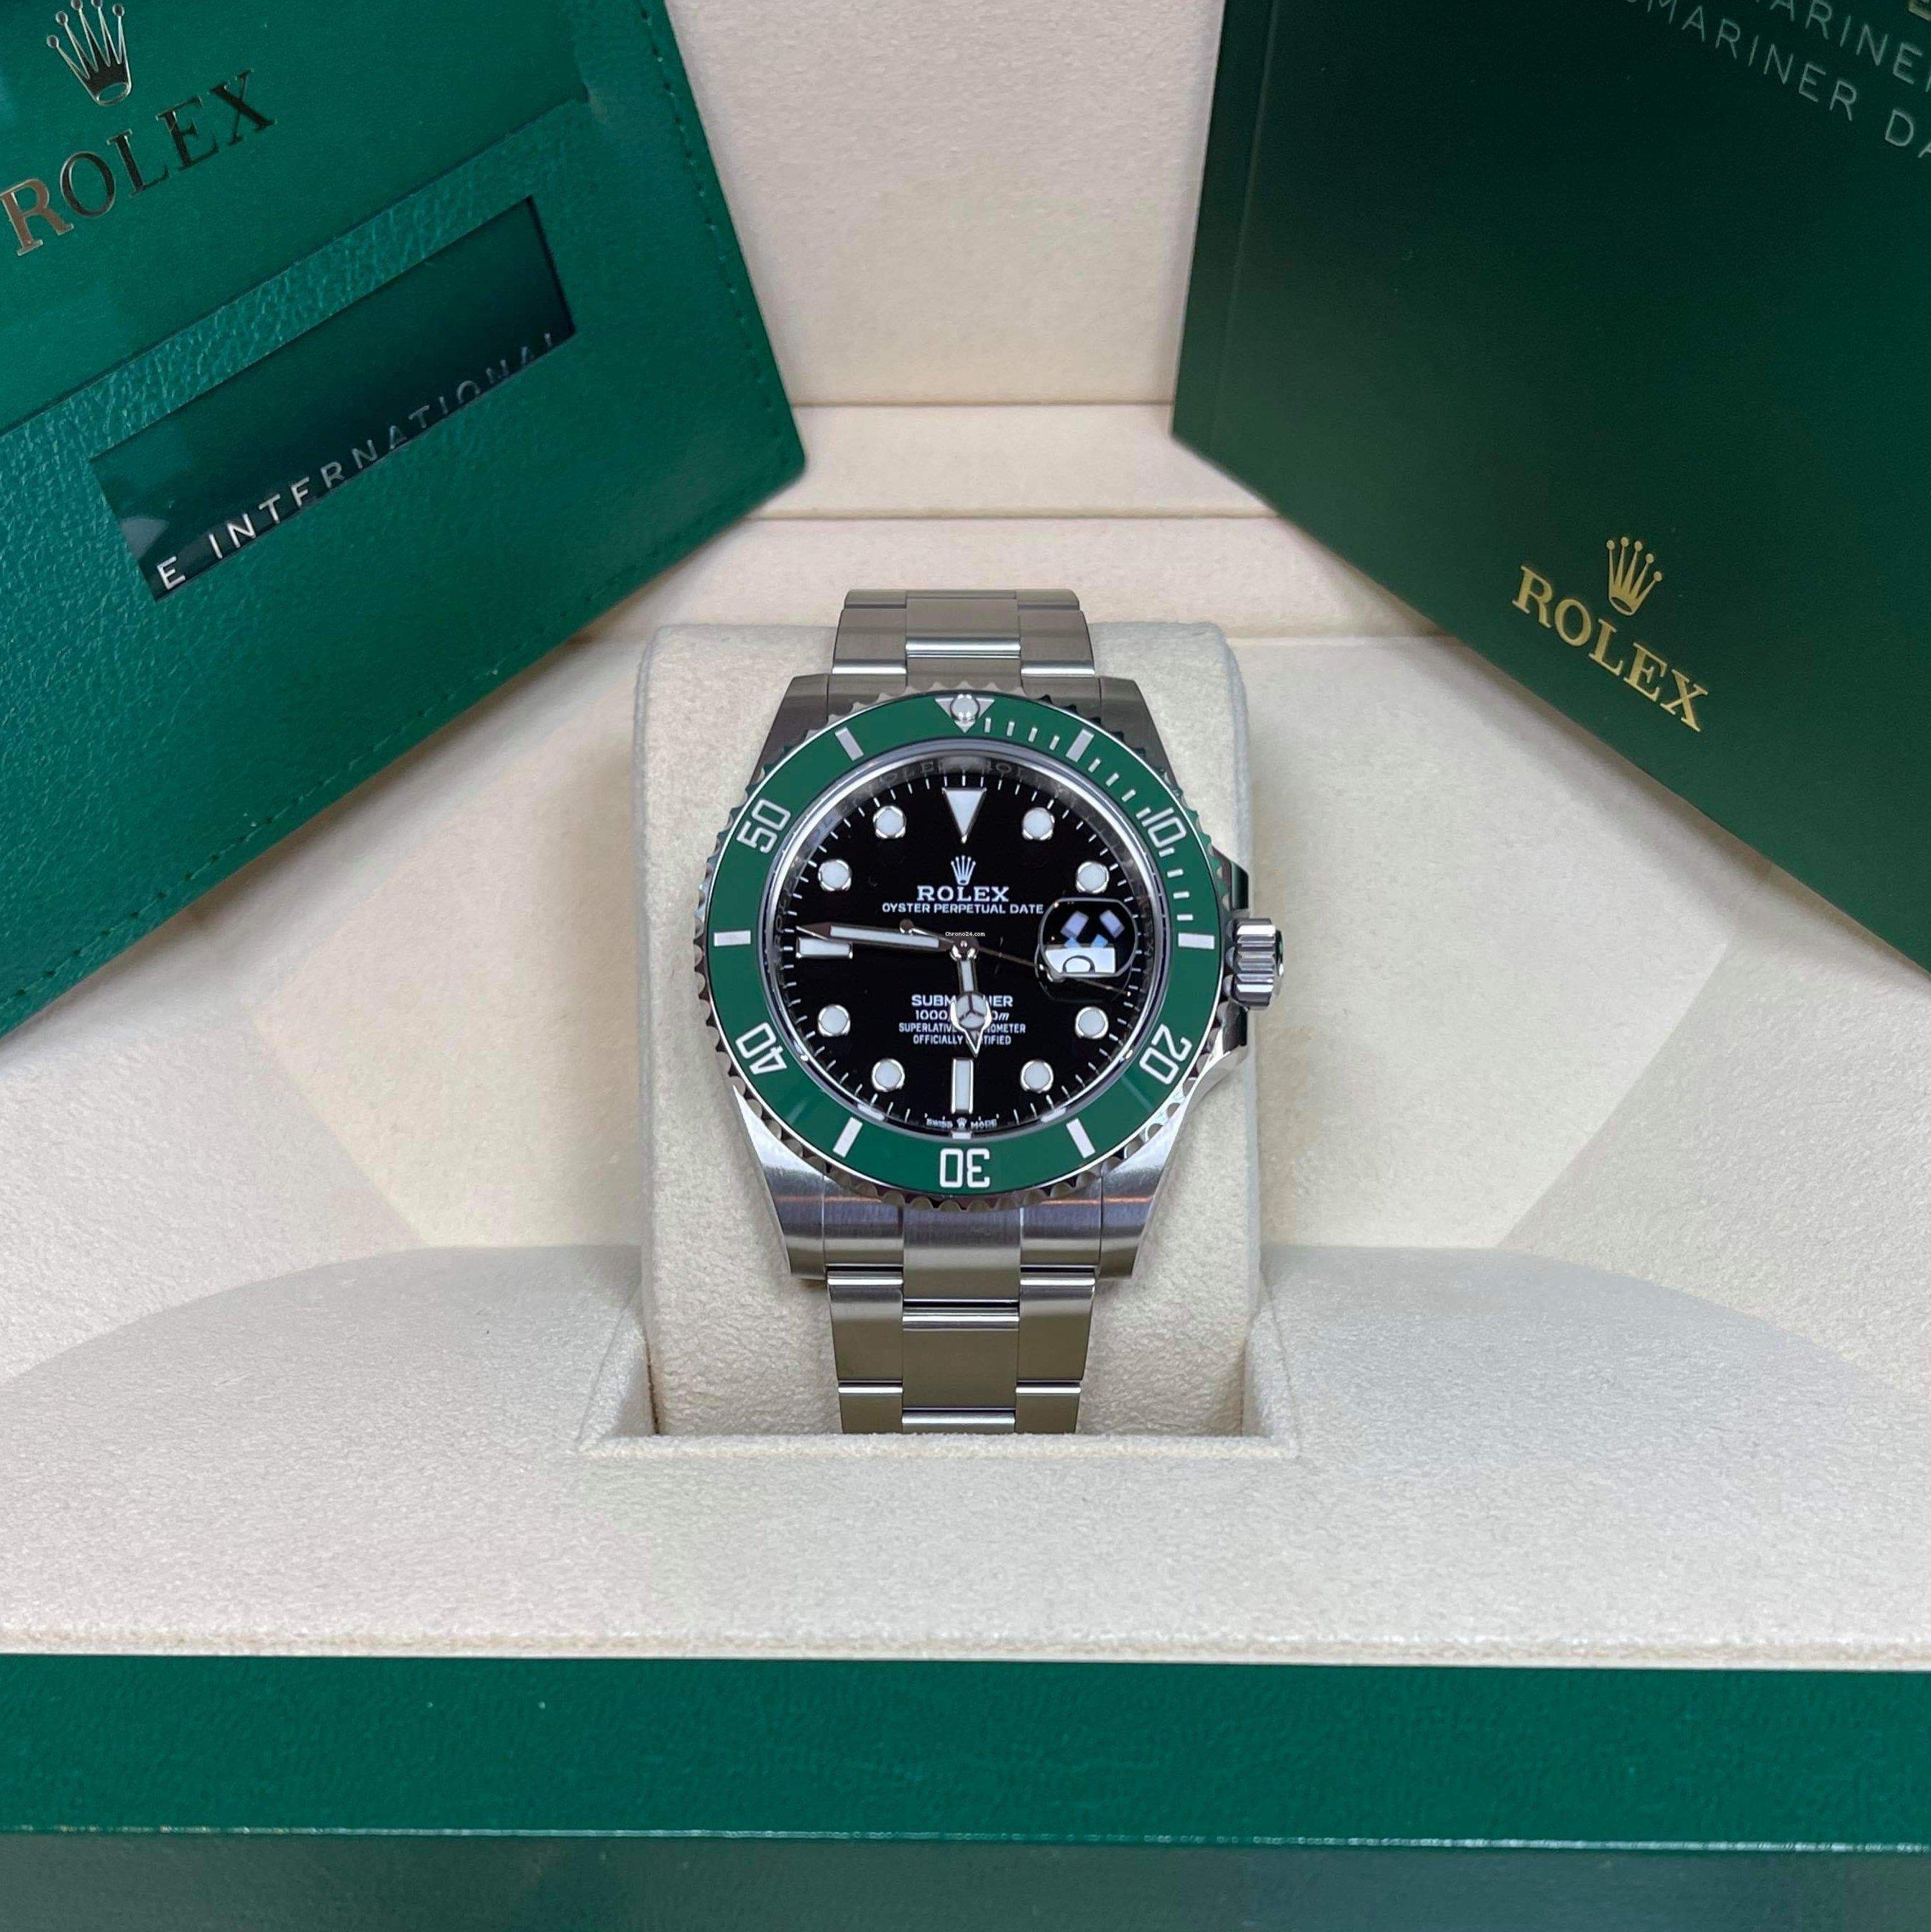 Rolex Submariner Hulk Stainless Steel Green Dial, Bespoke for Price on  request for sale from a Trusted Seller on Chrono24